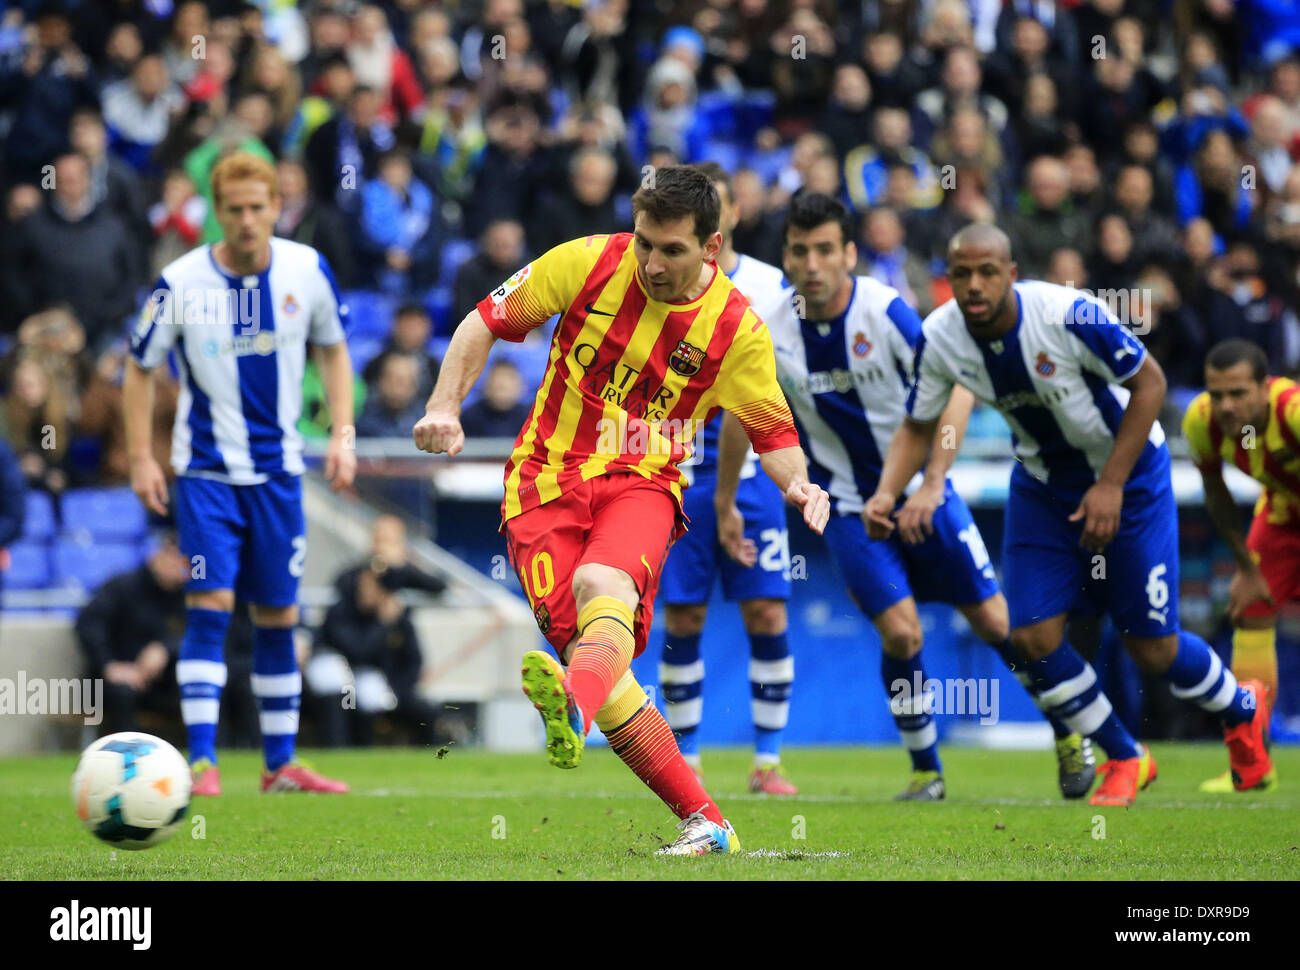 Barcelona, Spain. 29th Mar, 2014. Leo Messi score the penalty on in the match between RCD Espanyol and FC Barcelona matchday 31 of La Liga, played at Cornella-El Prat Stadium on March 29, 2014. Photo: Joan Valls/Urbanandsport/Nurphoto. Credit:  Joan Valls/NurPhoto/ZUMAPRESS.com/Alamy Live News Stock Photo